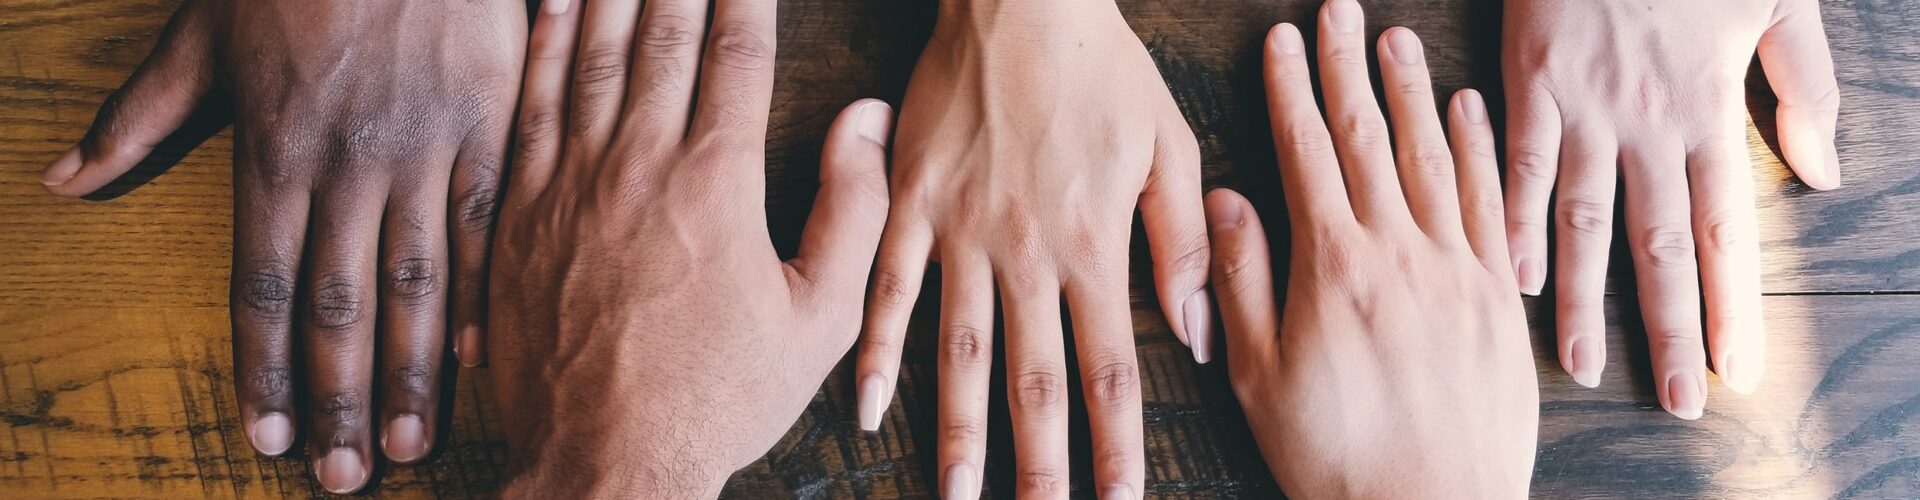 Close up of four people's hands in a row on a wooden table